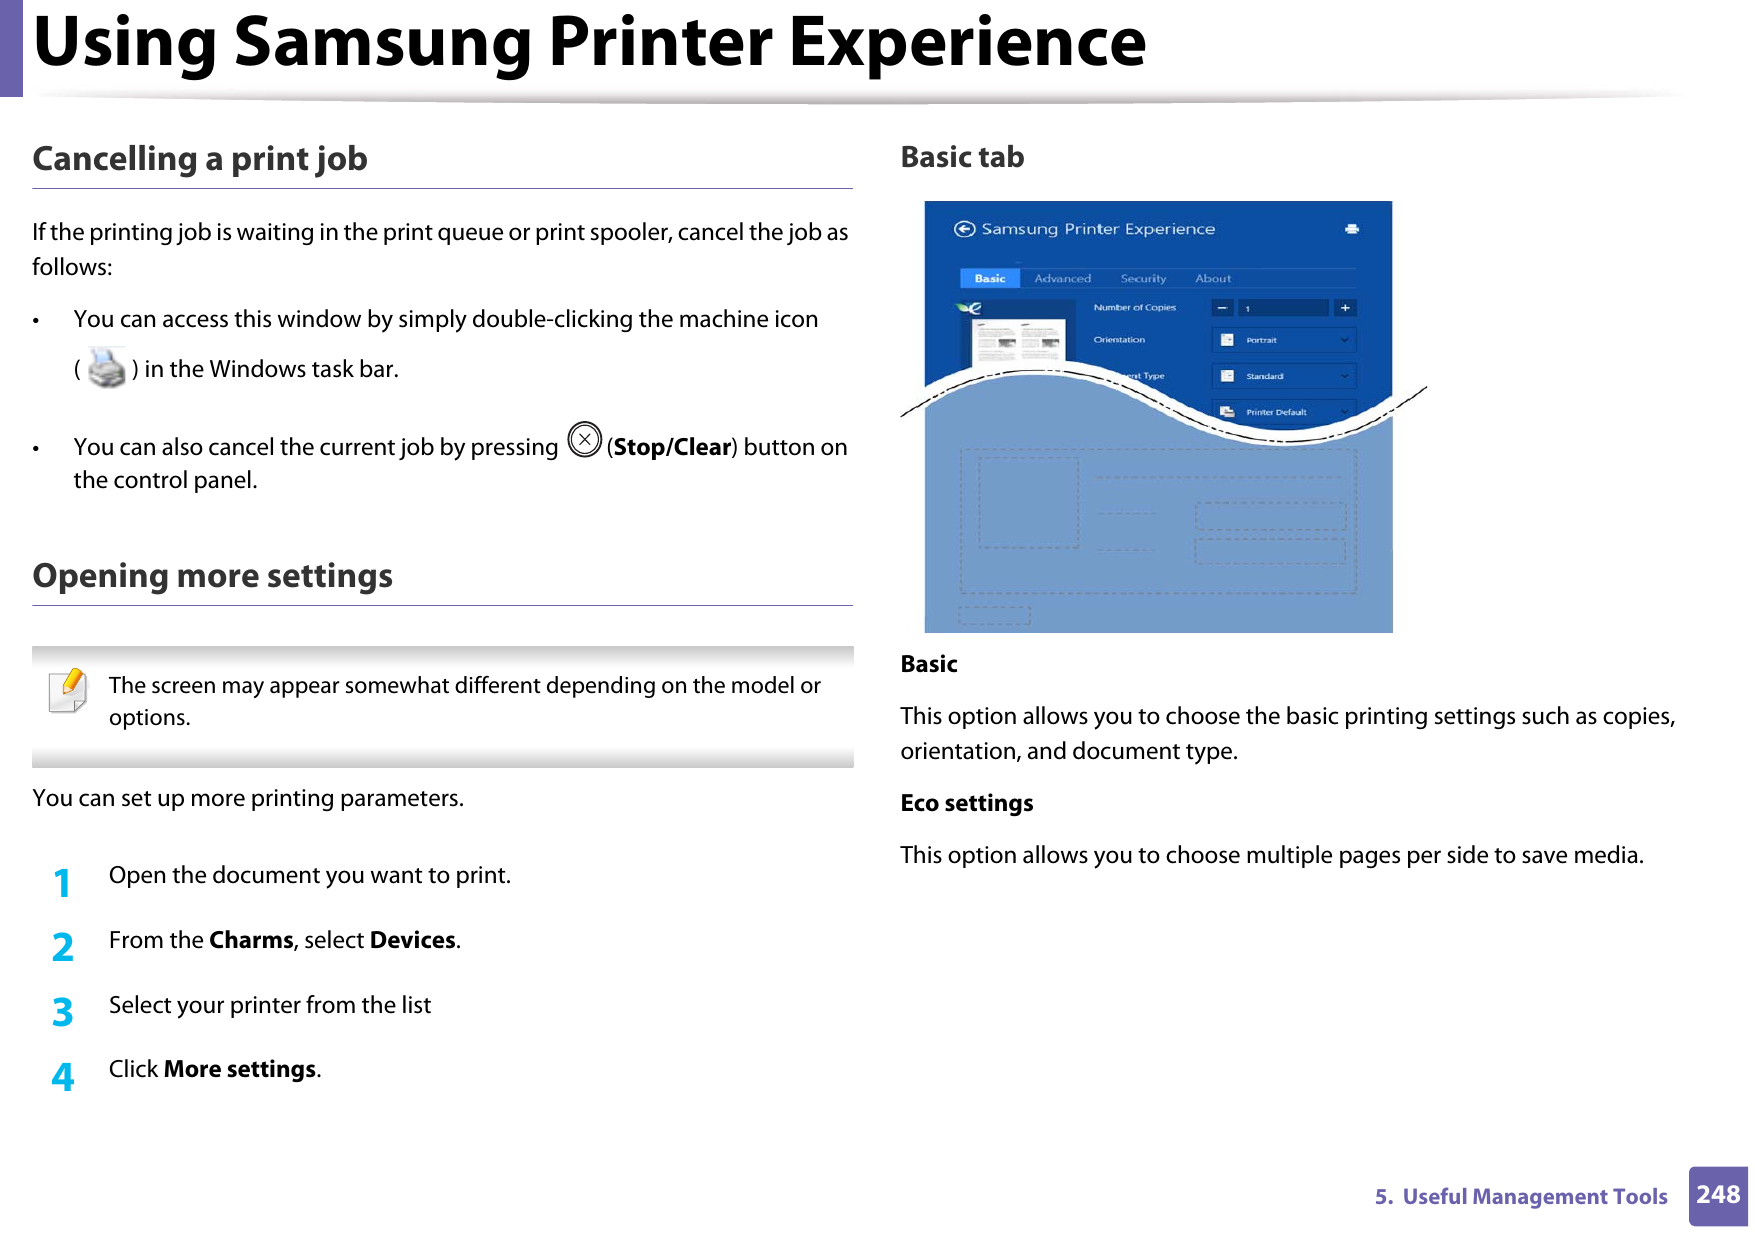 Using Samsung Printer Experience2485.  Useful Management ToolsCancelling a print jobIf the printing job is waiting in the print queue or print spooler, cancel the job as follows:• You can access this window by simply double-clicking the machine icon ( ) in the Windows task bar. • You can also cancel the current job by pressing  (Stop/Clear) button on the control panel.Opening more settings The screen may appear somewhat different depending on the model or options. You can set up more printing parameters.1Open the document you want to print.2  From the Charms, select Devices.3  Select your printer from the list4  Click More settings.Basic tabBasicThis option allows you to choose the basic printing settings such as copies, orientation, and document type.Eco settingsThis option allows you to choose multiple pages per side to save media.